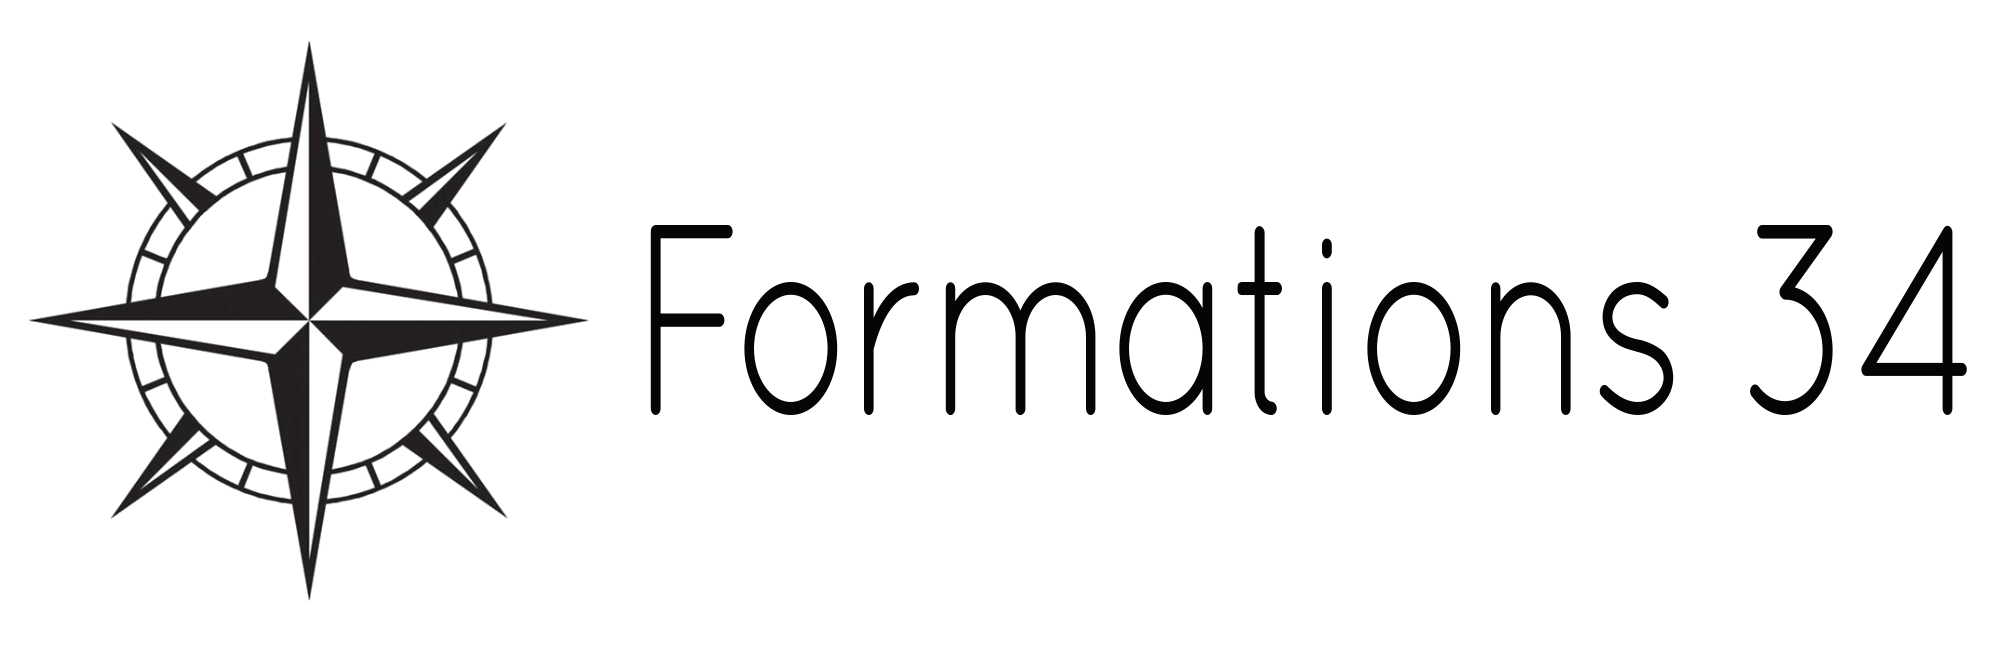 Formations 34